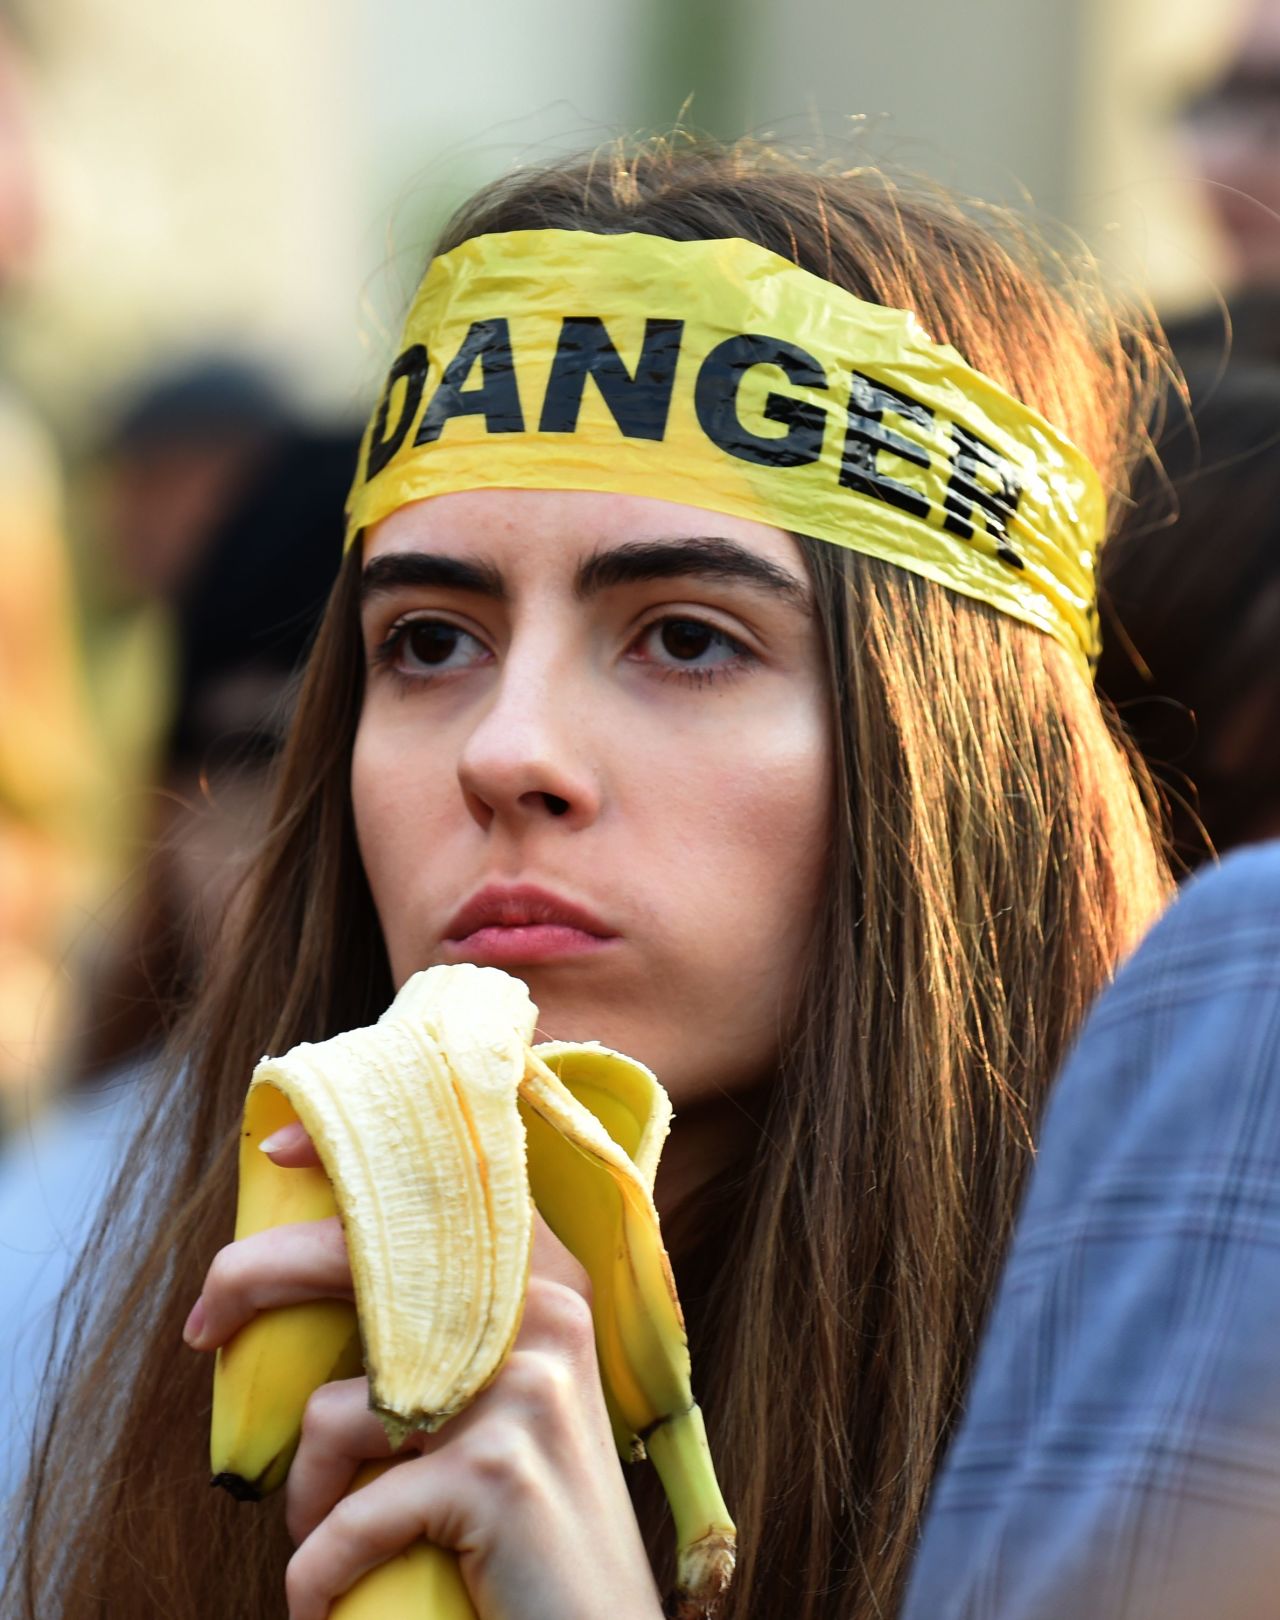 People ate bananas in protest of the museum's decision.